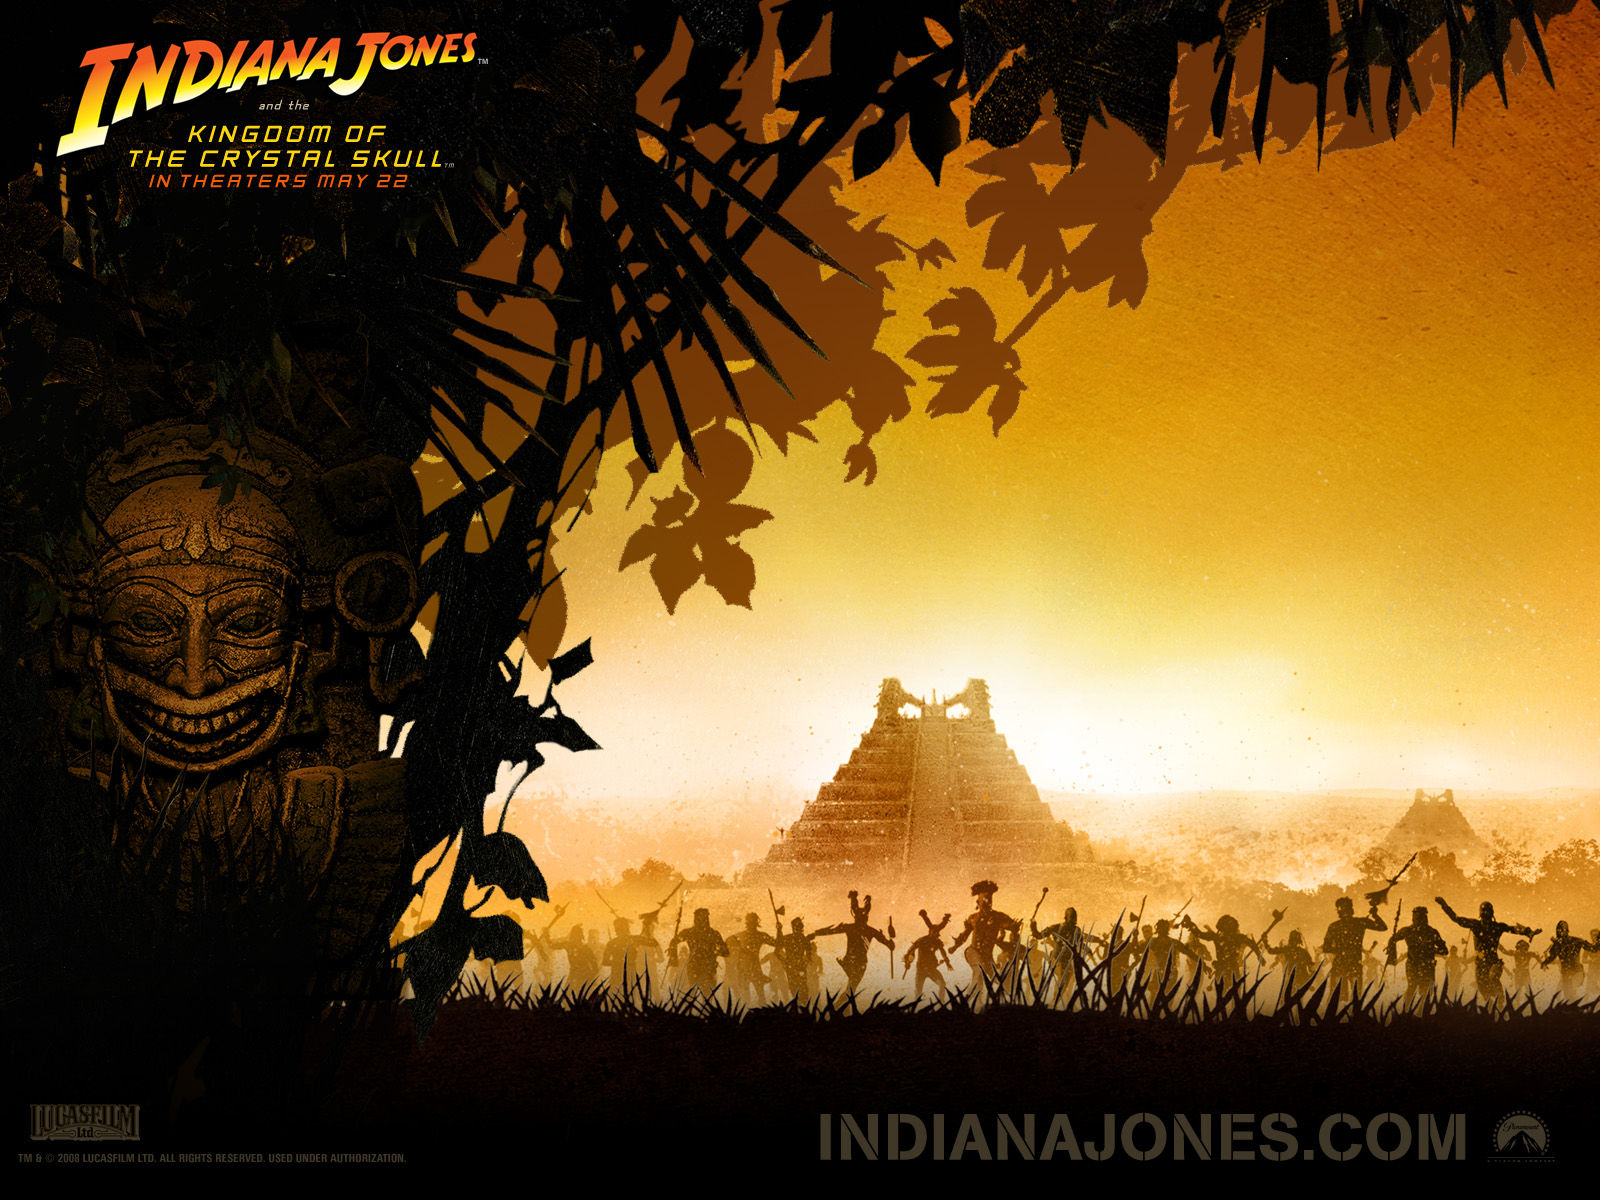 Indiana Jones And The Kingdom Of The Crystal Skull - Kingdom Of The Crystal Skull Pyramid , HD Wallpaper & Backgrounds